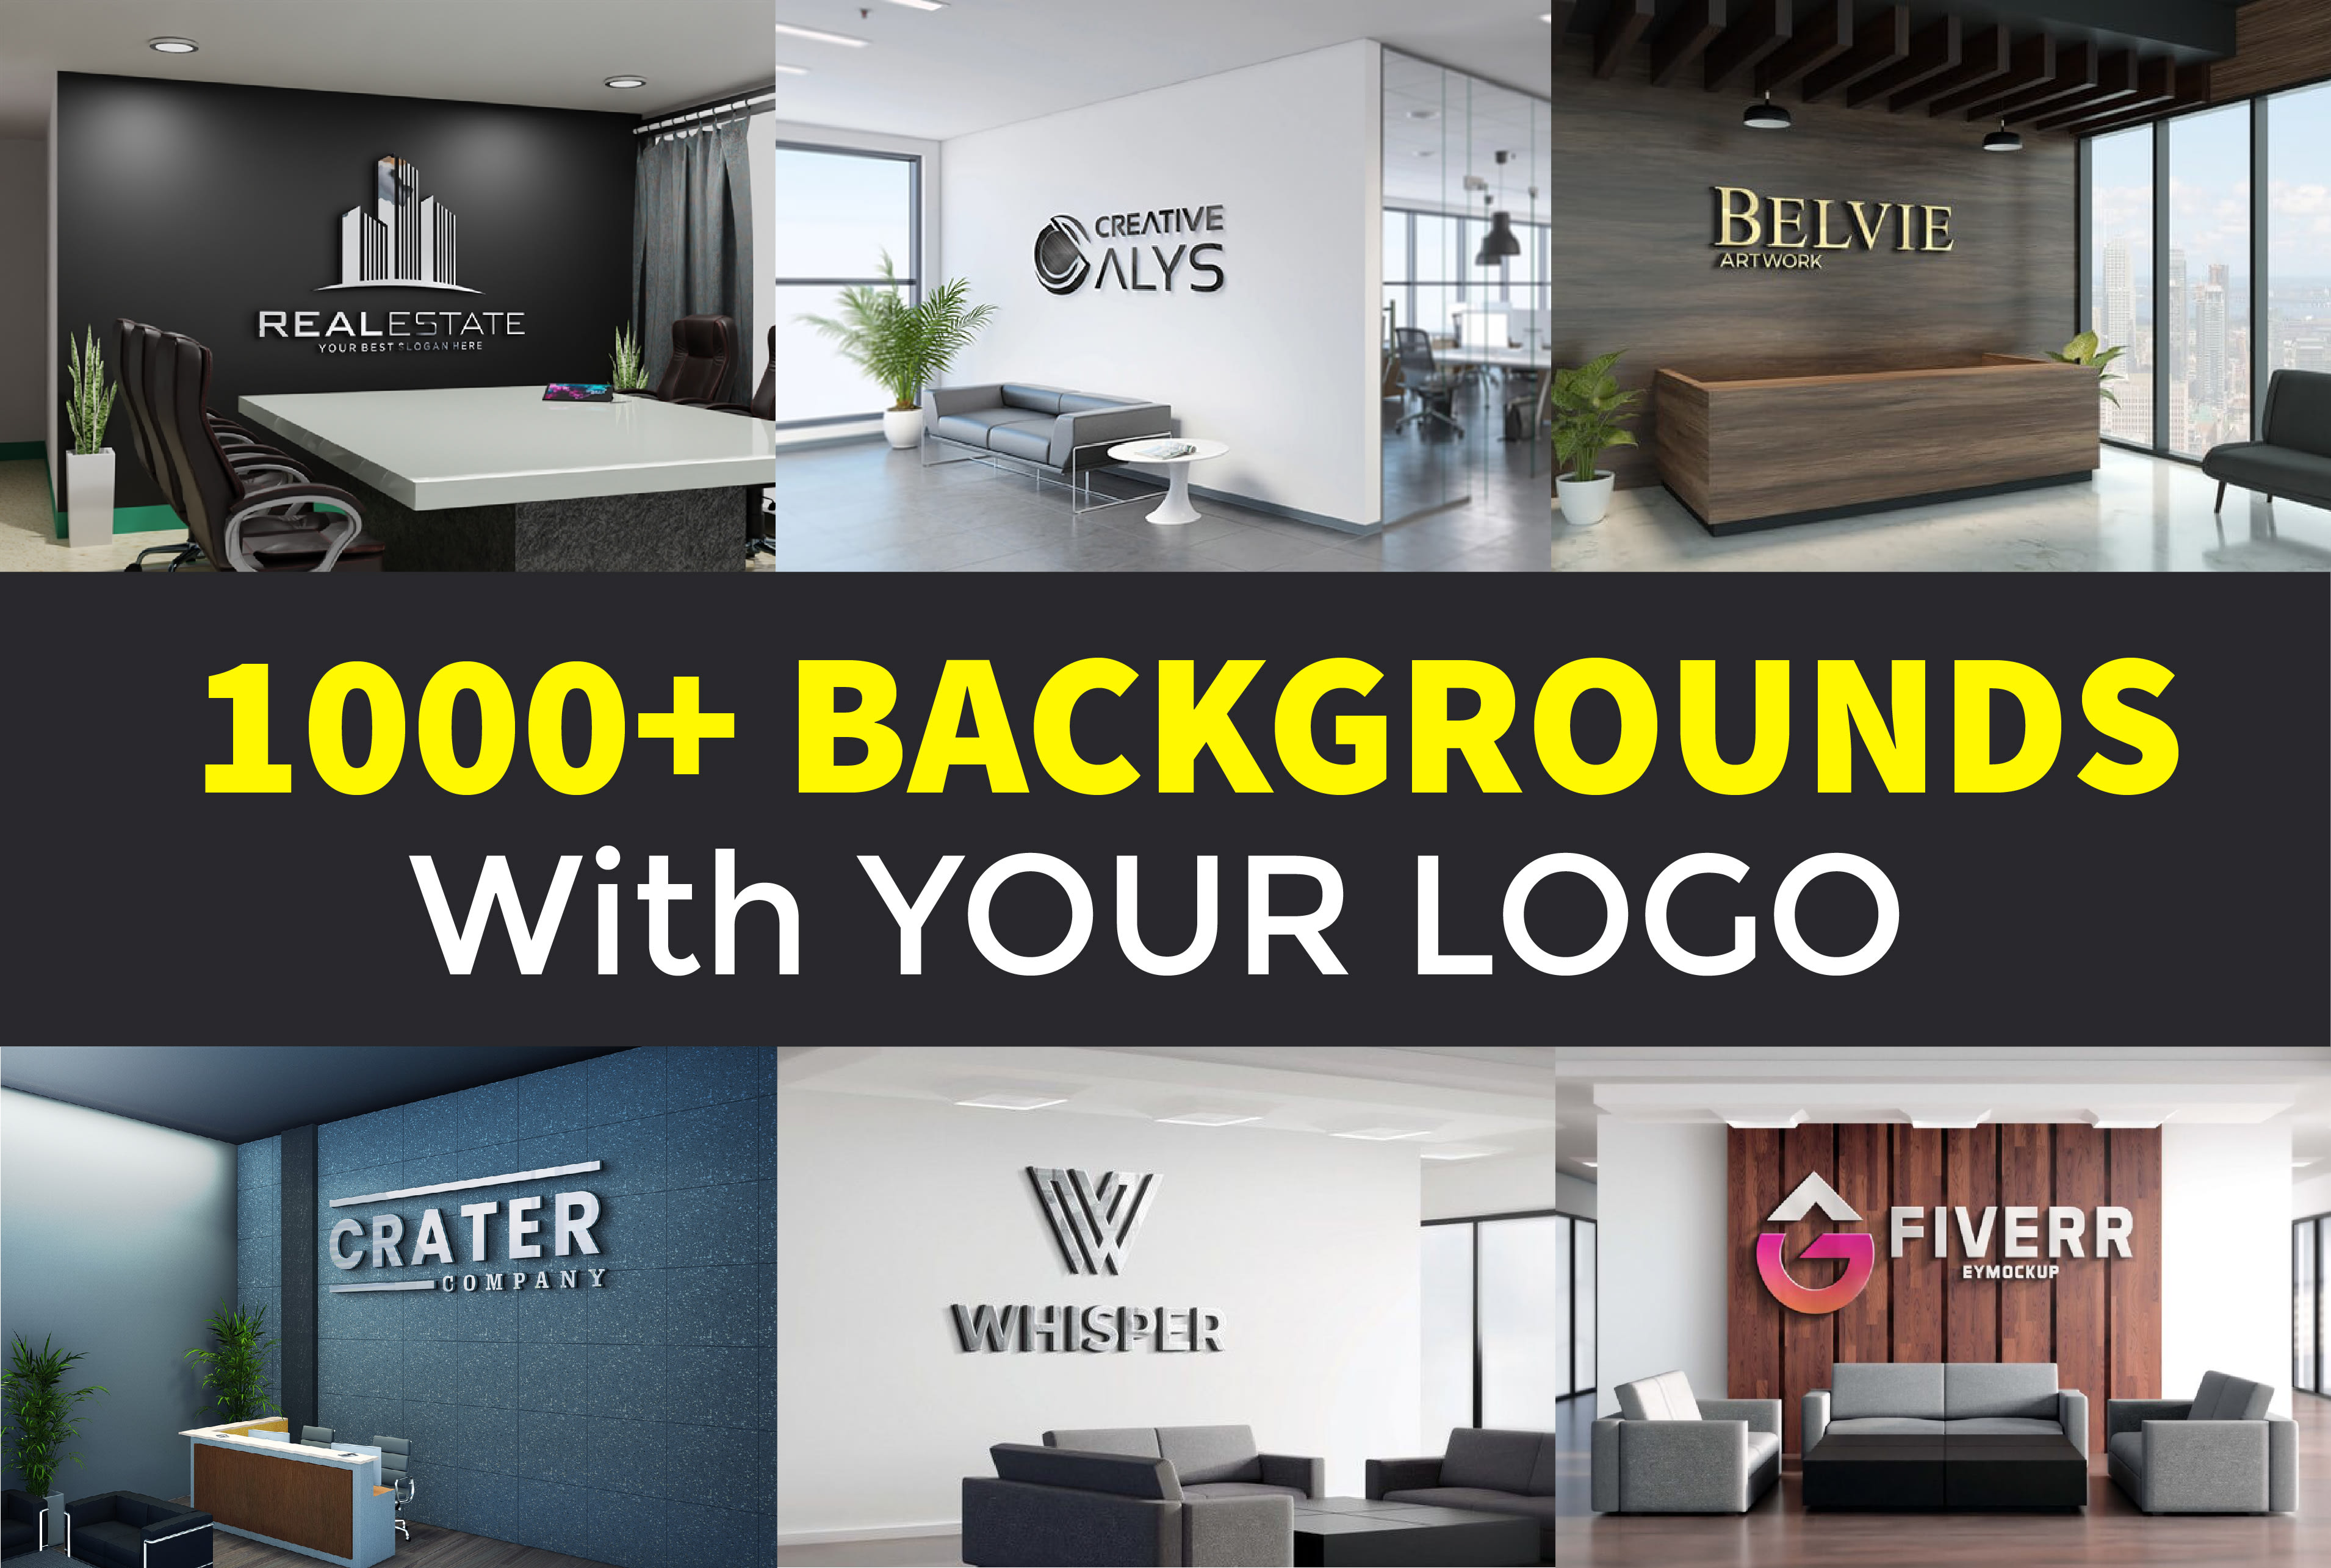 Design a custom zoom virtual background with your logo by Quaaly | Fiverr